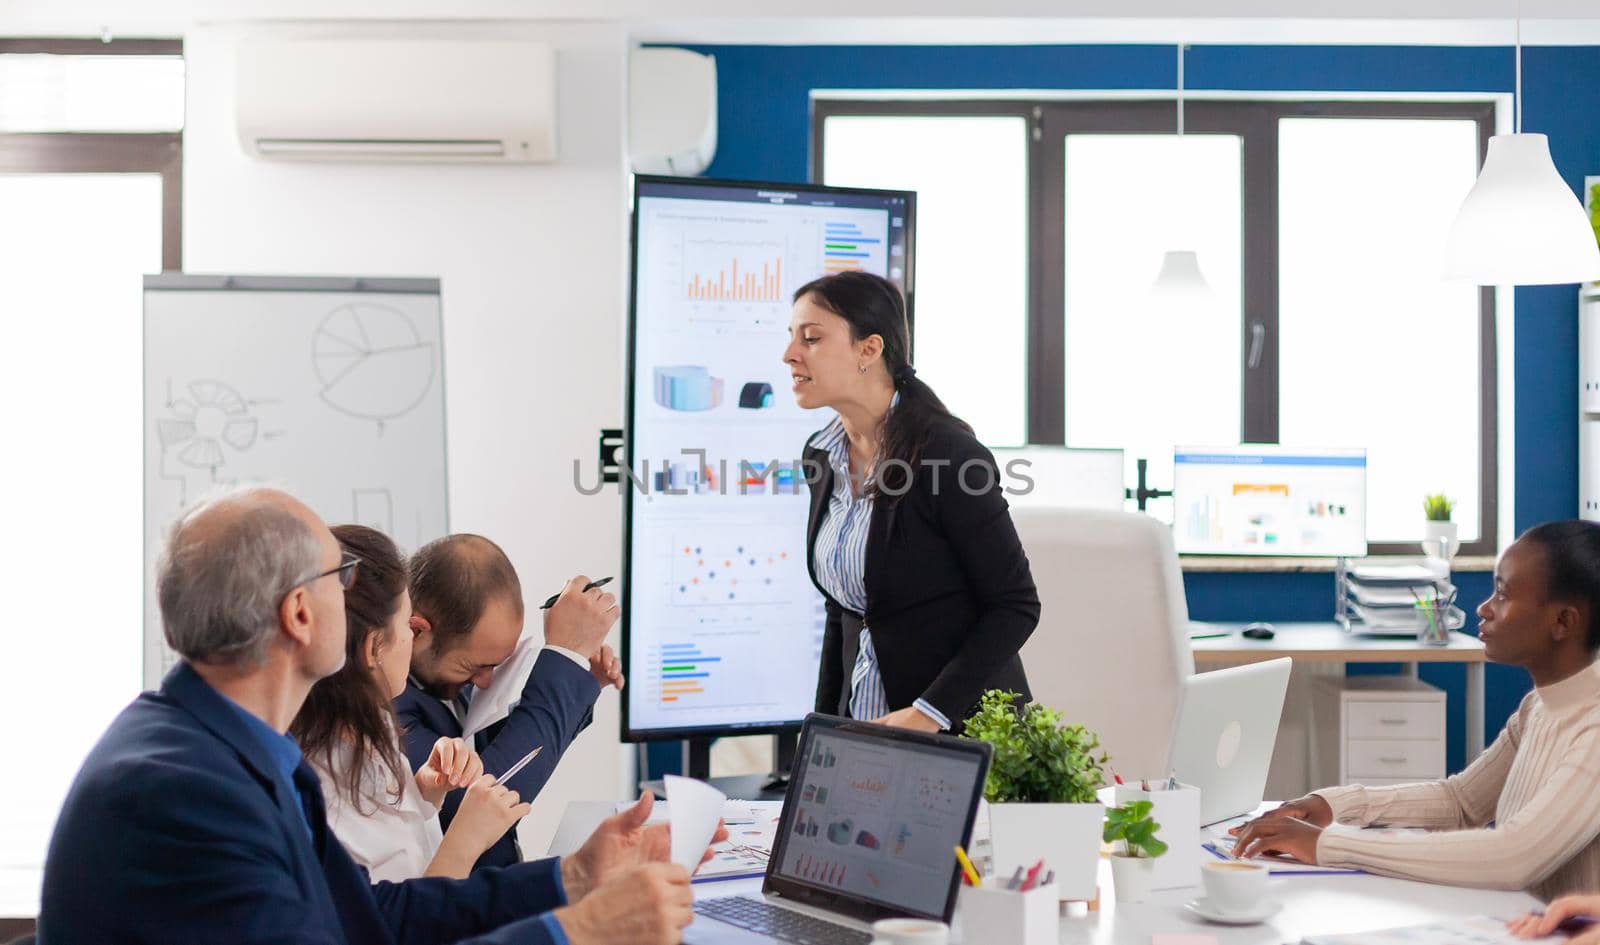 Furious entrepreneur hitting employee with clipboard in front of coworkers because of project failure. Businesswoman raging about multitasking difficult job, screaming in boardroom